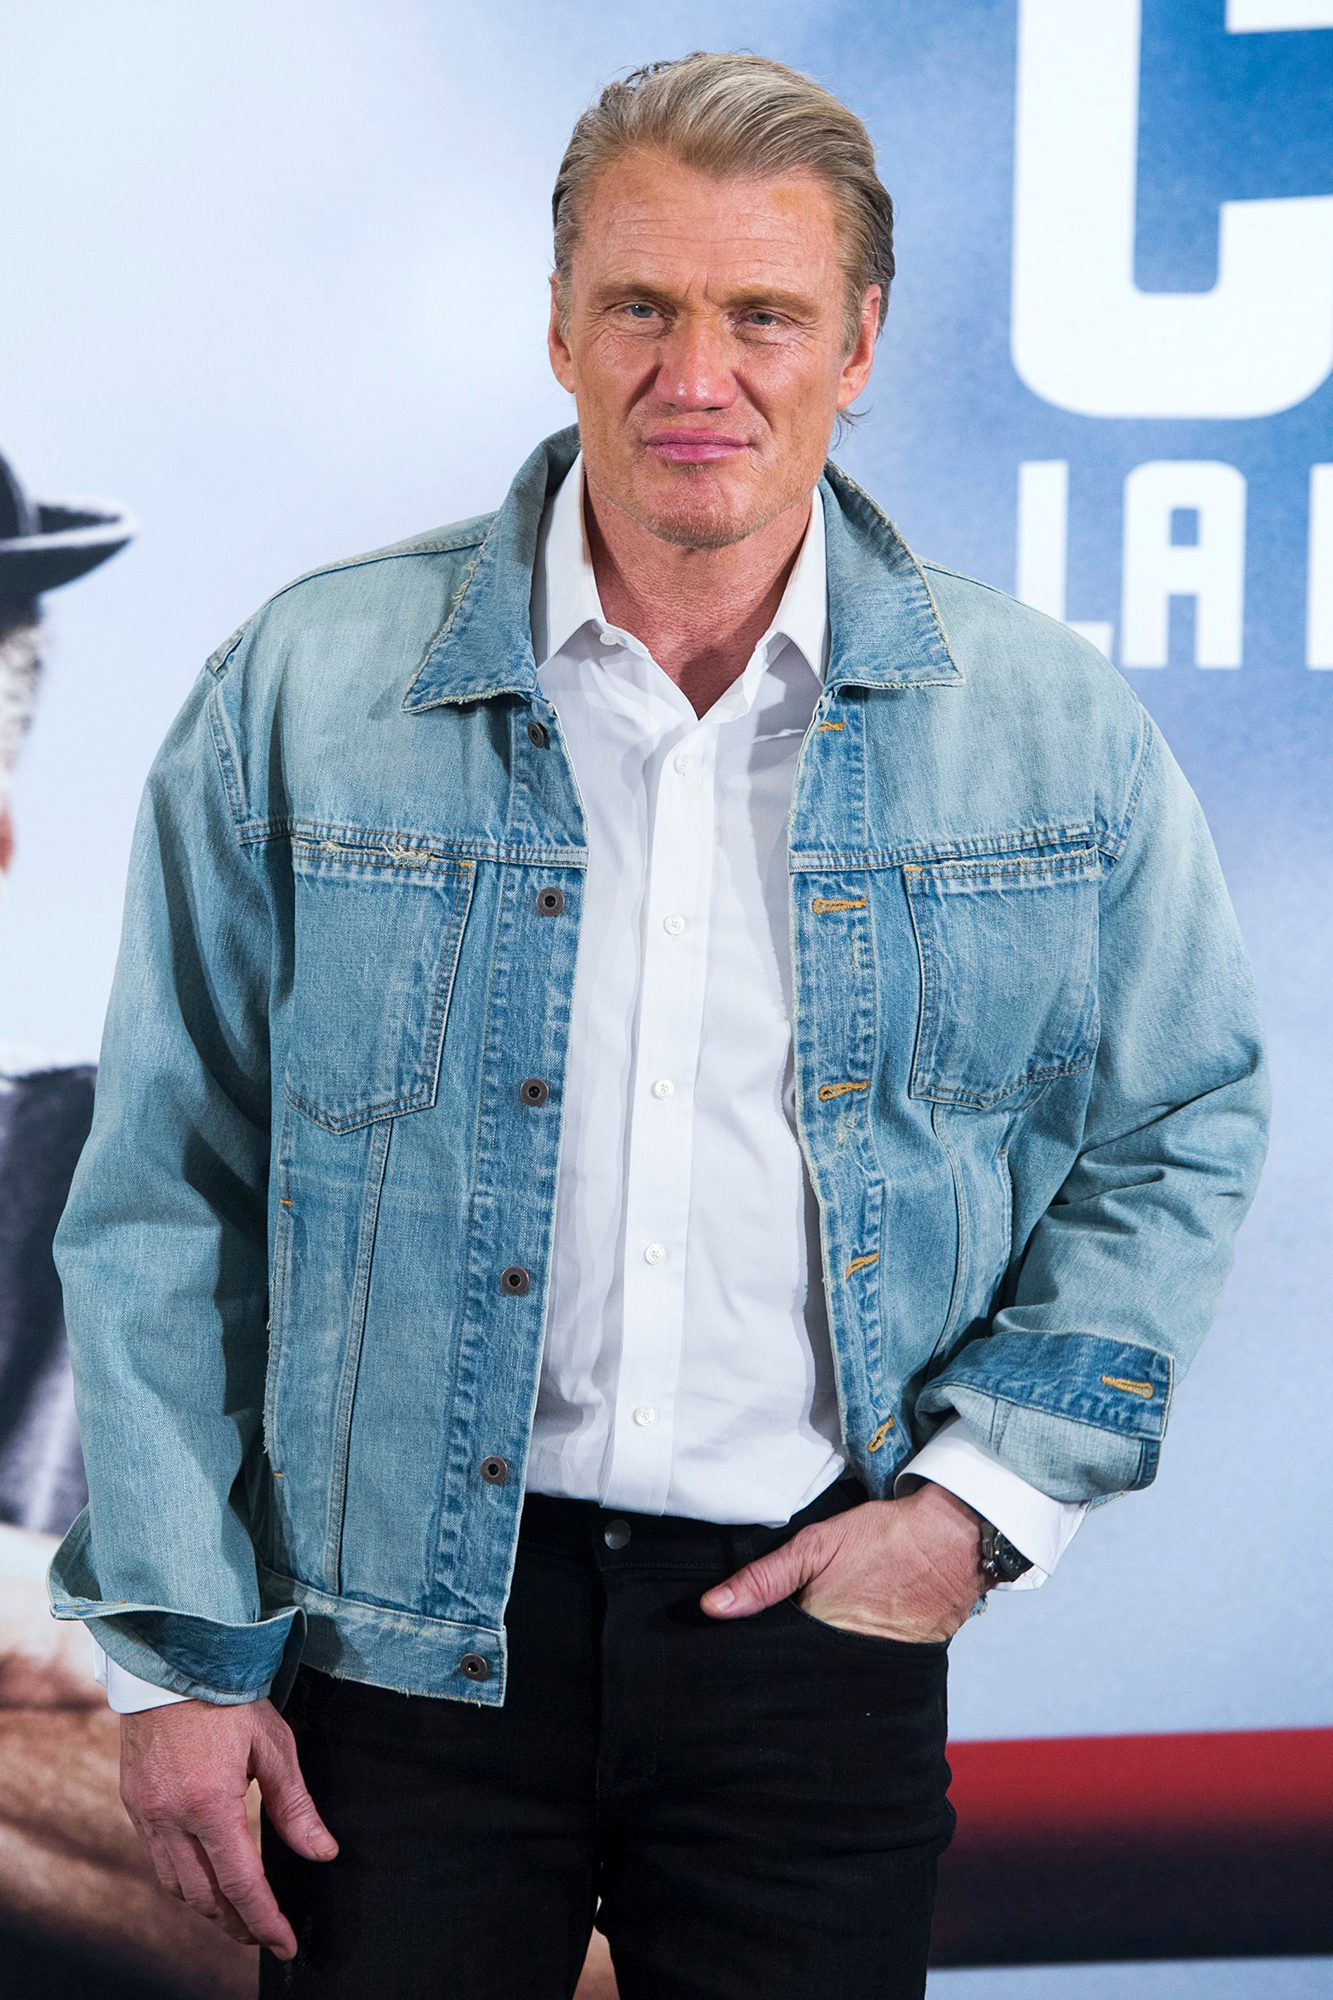 Dolph Lundgren Has Privately Battled Cancer for 8 Years